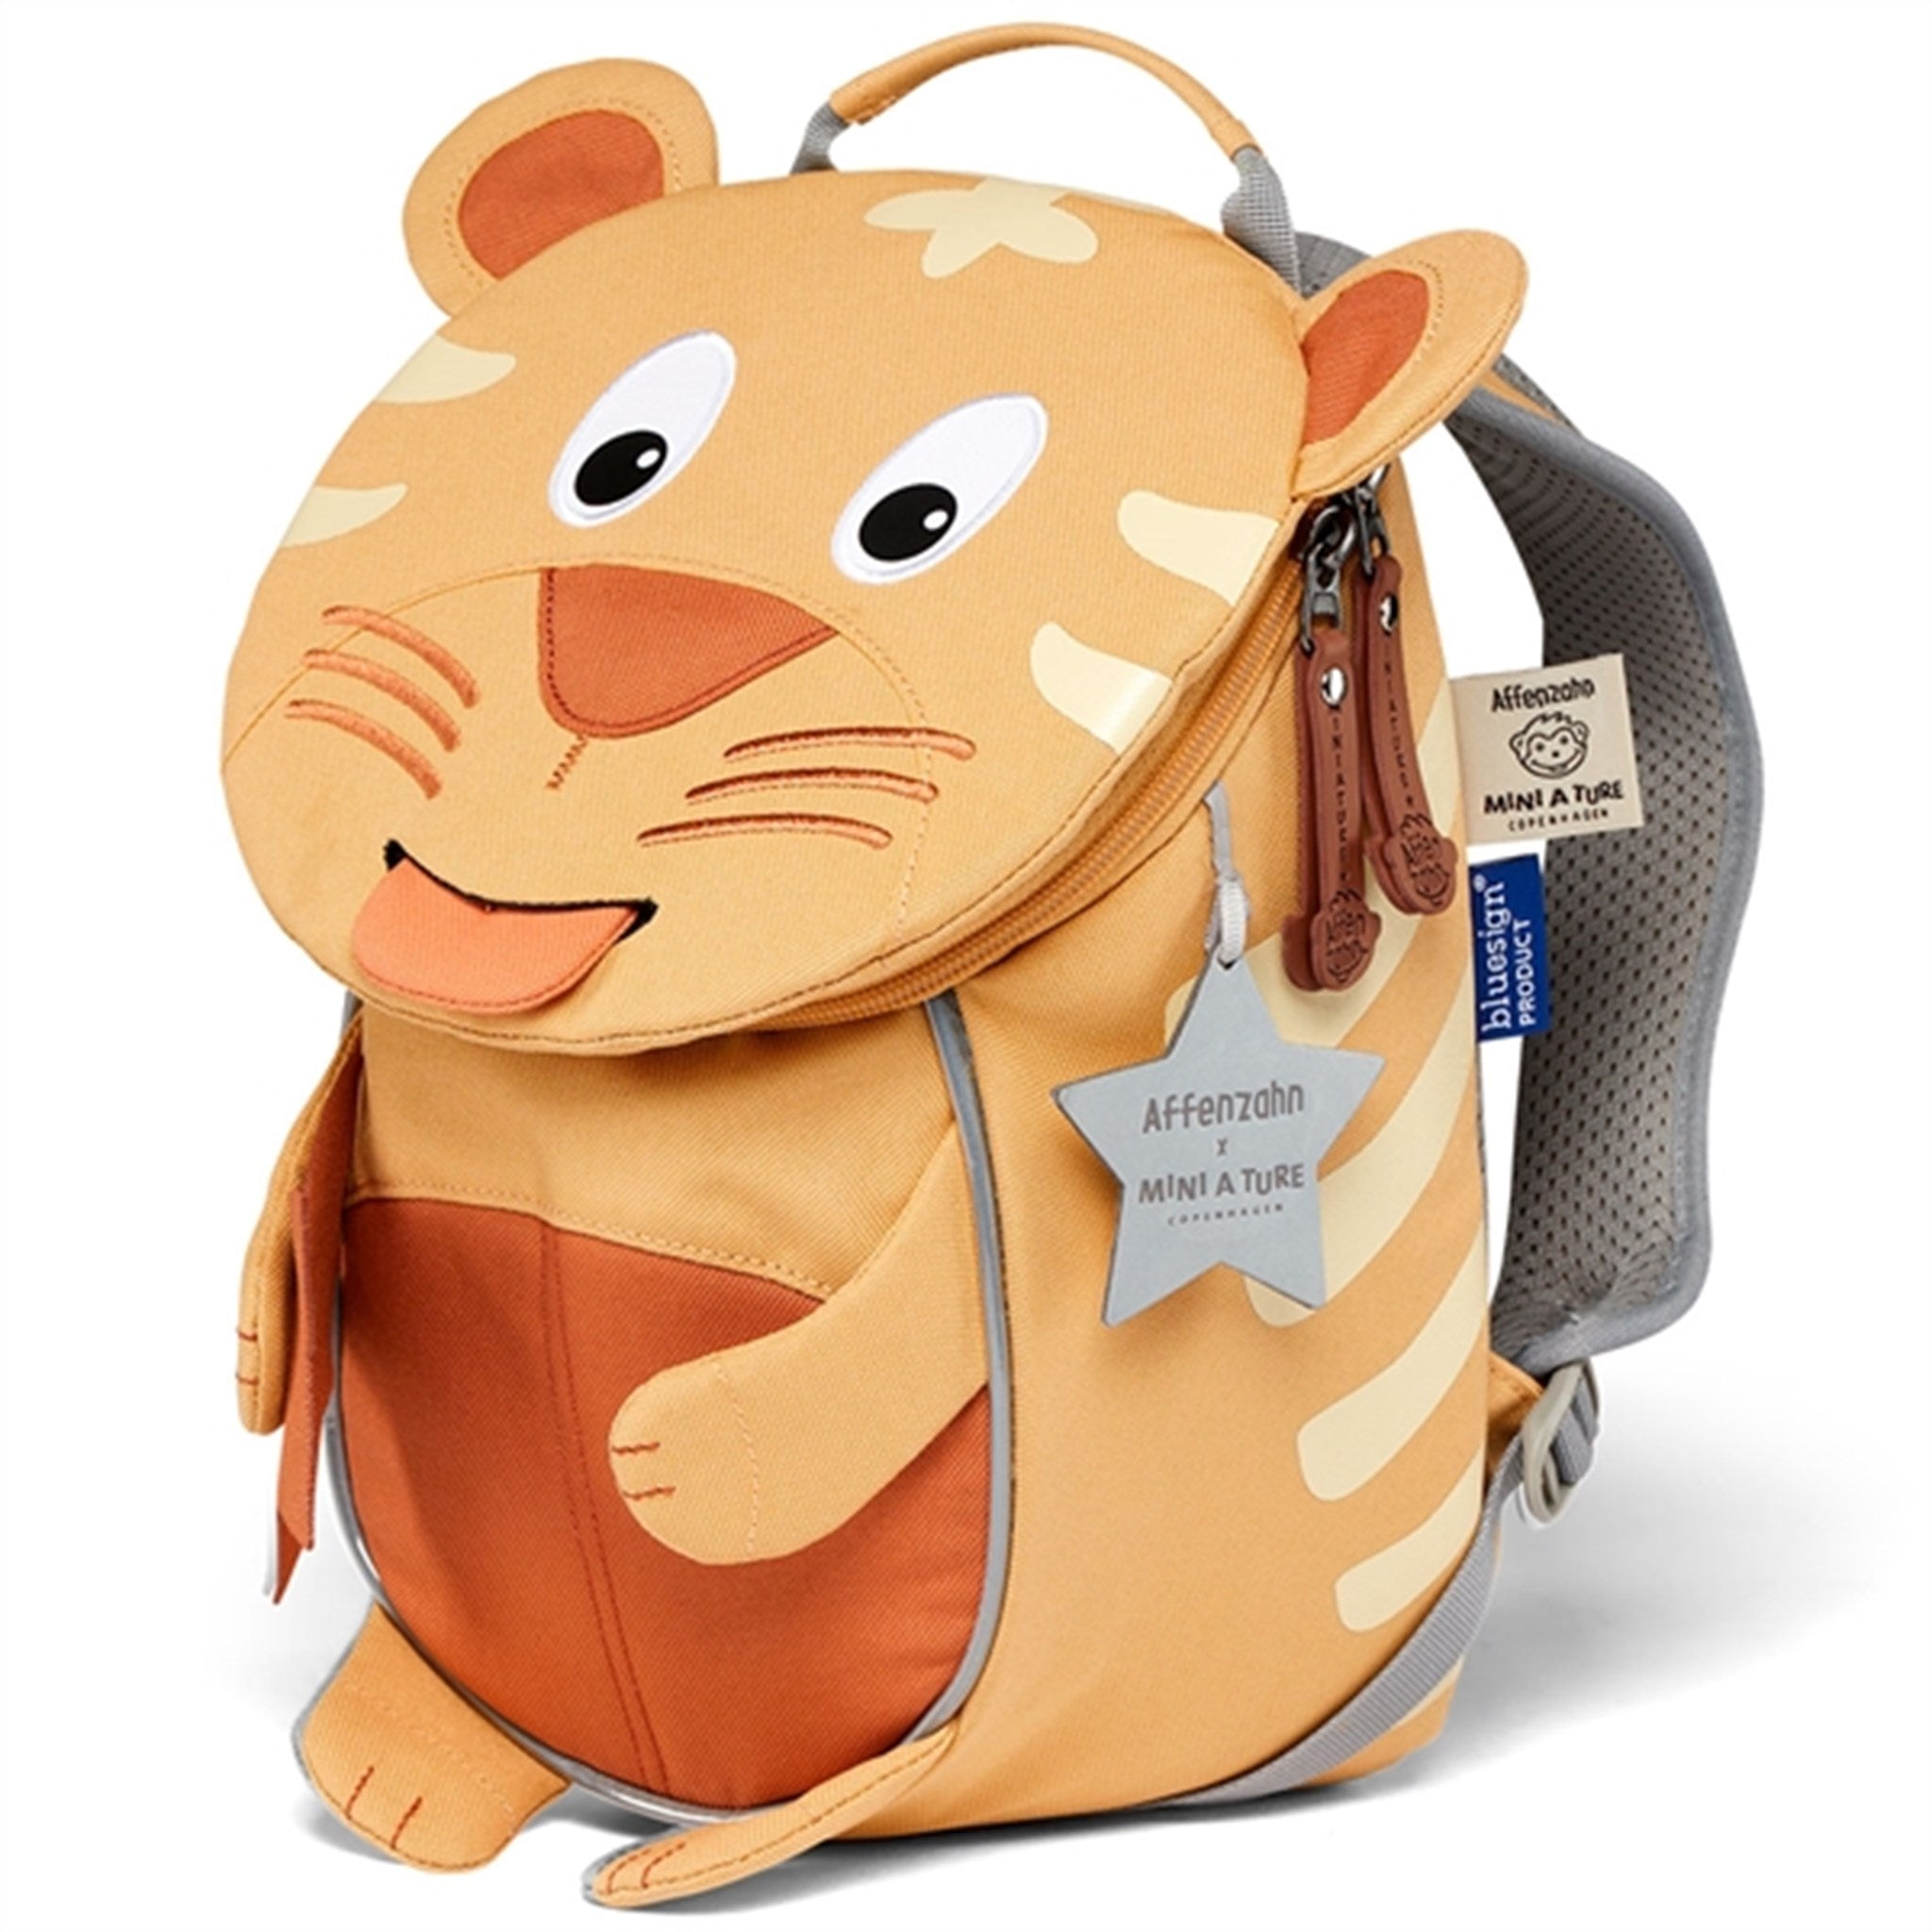 Affenzahn x MINI A TURE Day Care Backpack Small Friend Tiger Taffy Yellow 2